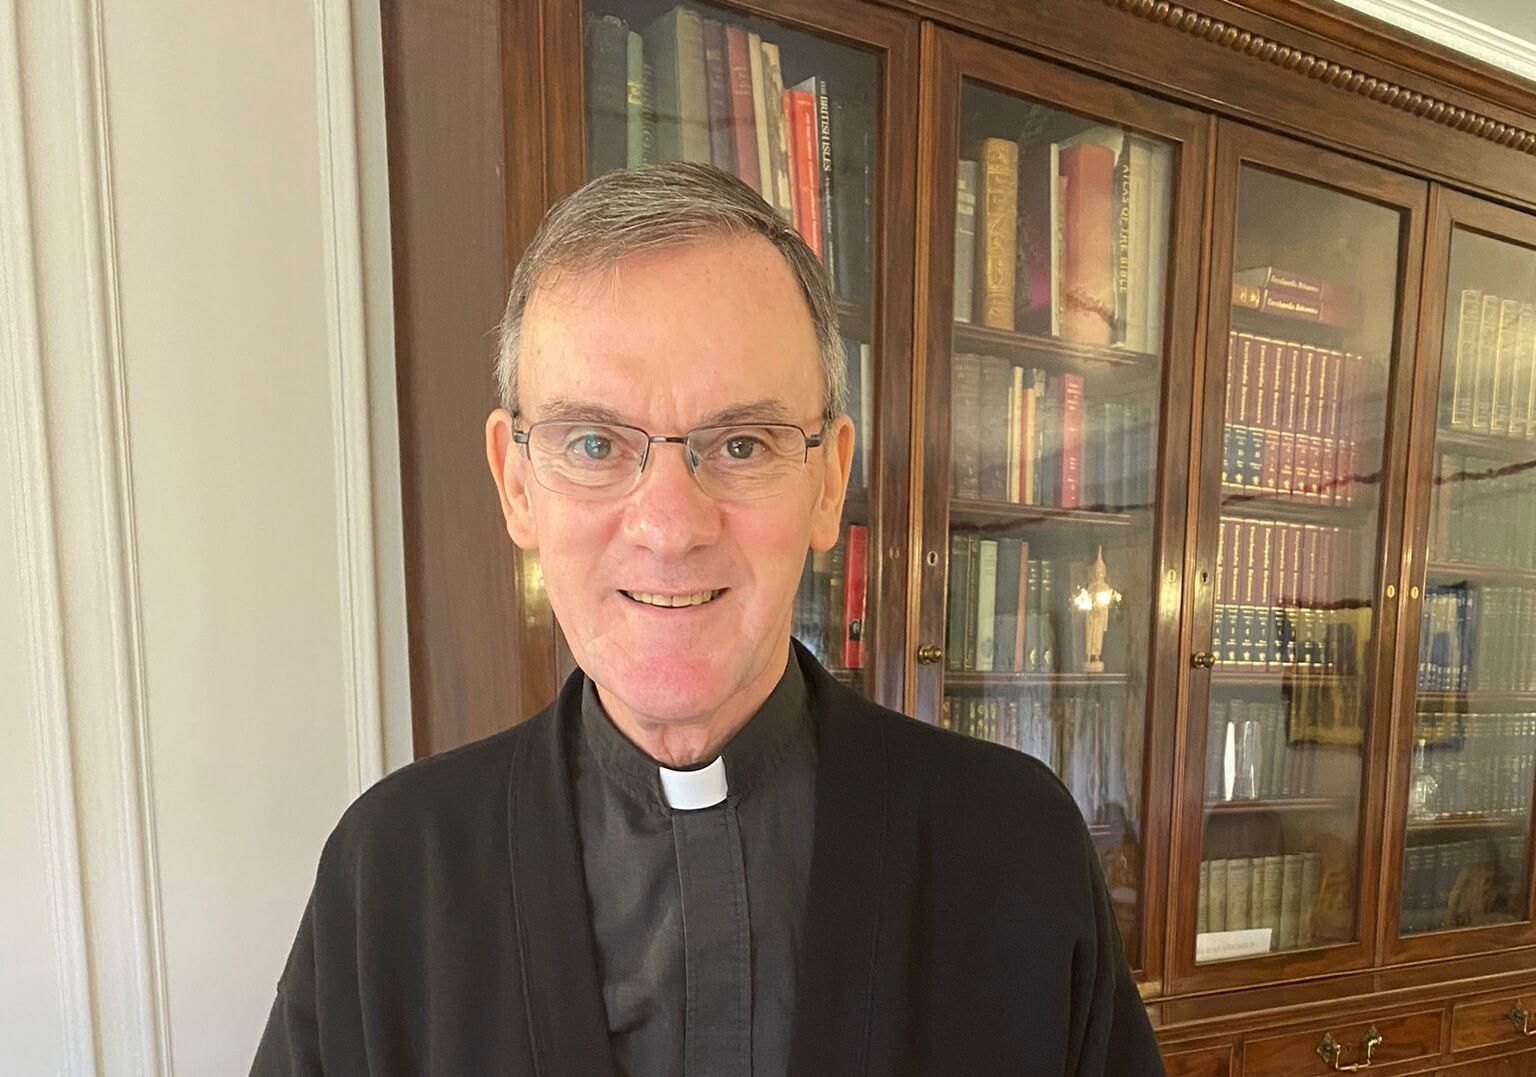 Bishop John Arnold – why Every Step counts